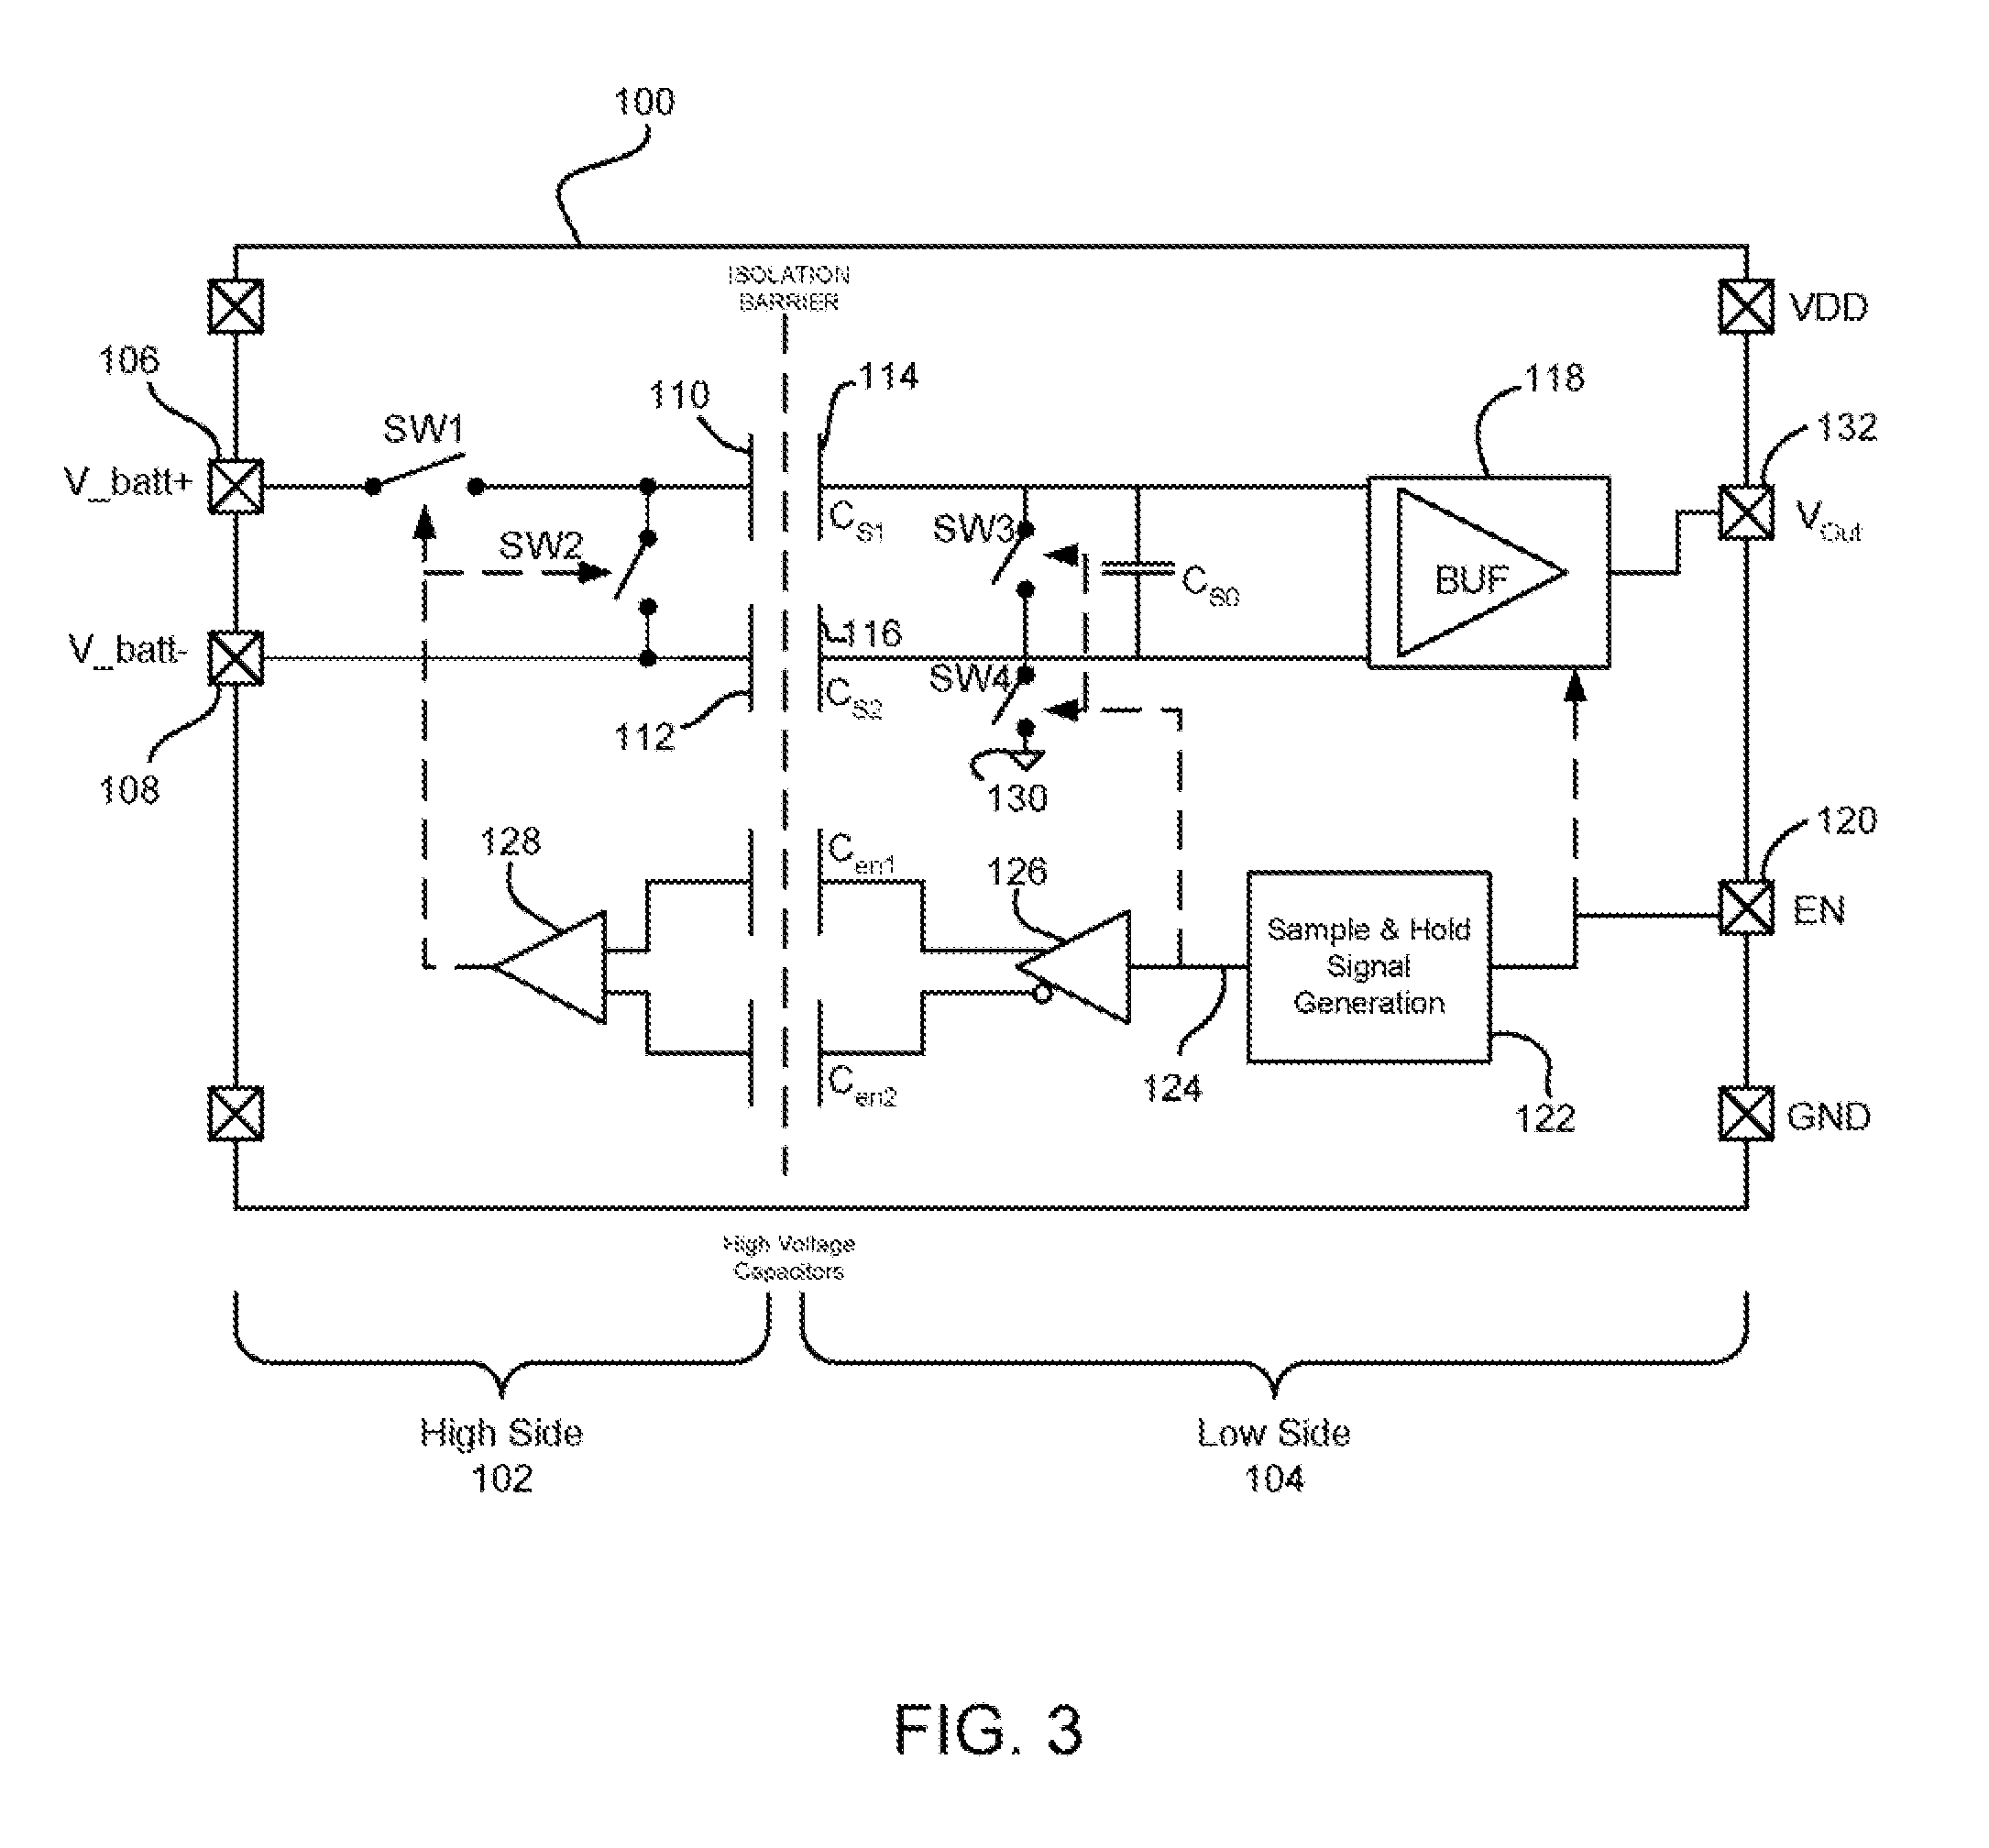 Integrated Battery Voltage Sensor with High Voltage Isolation, a Battery Voltage Sensing System and Methods Therefor